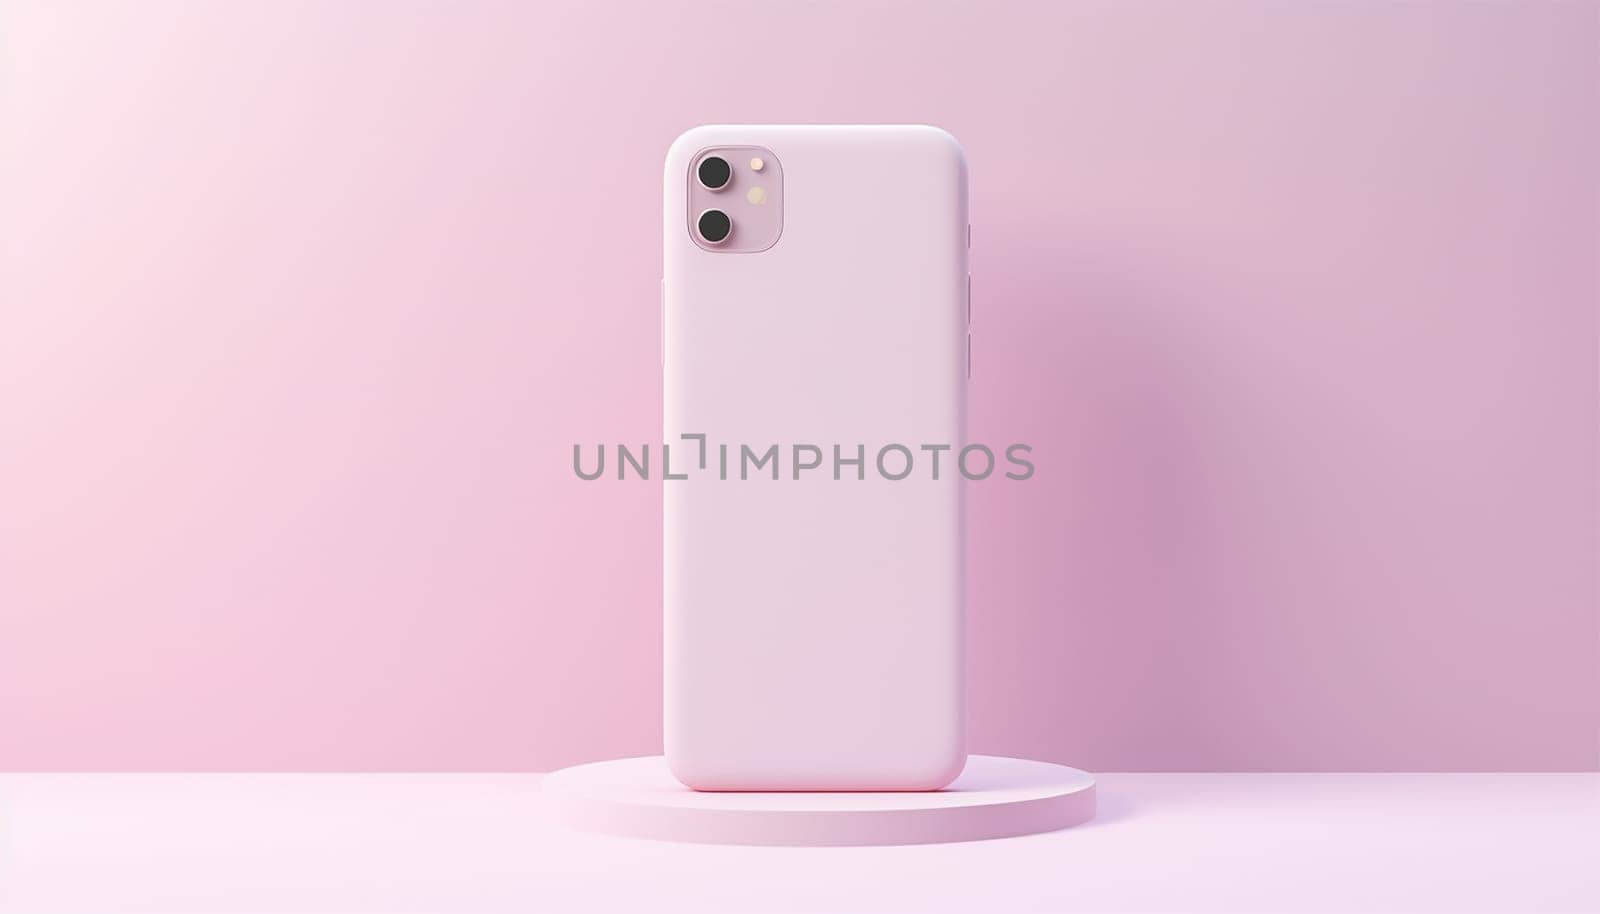 Minimalist modern clay mockup smartphones for presentation, application display, information graphics etc. EPS. 3D pastel pink Copy space smartphone mobile concept by Annebel146